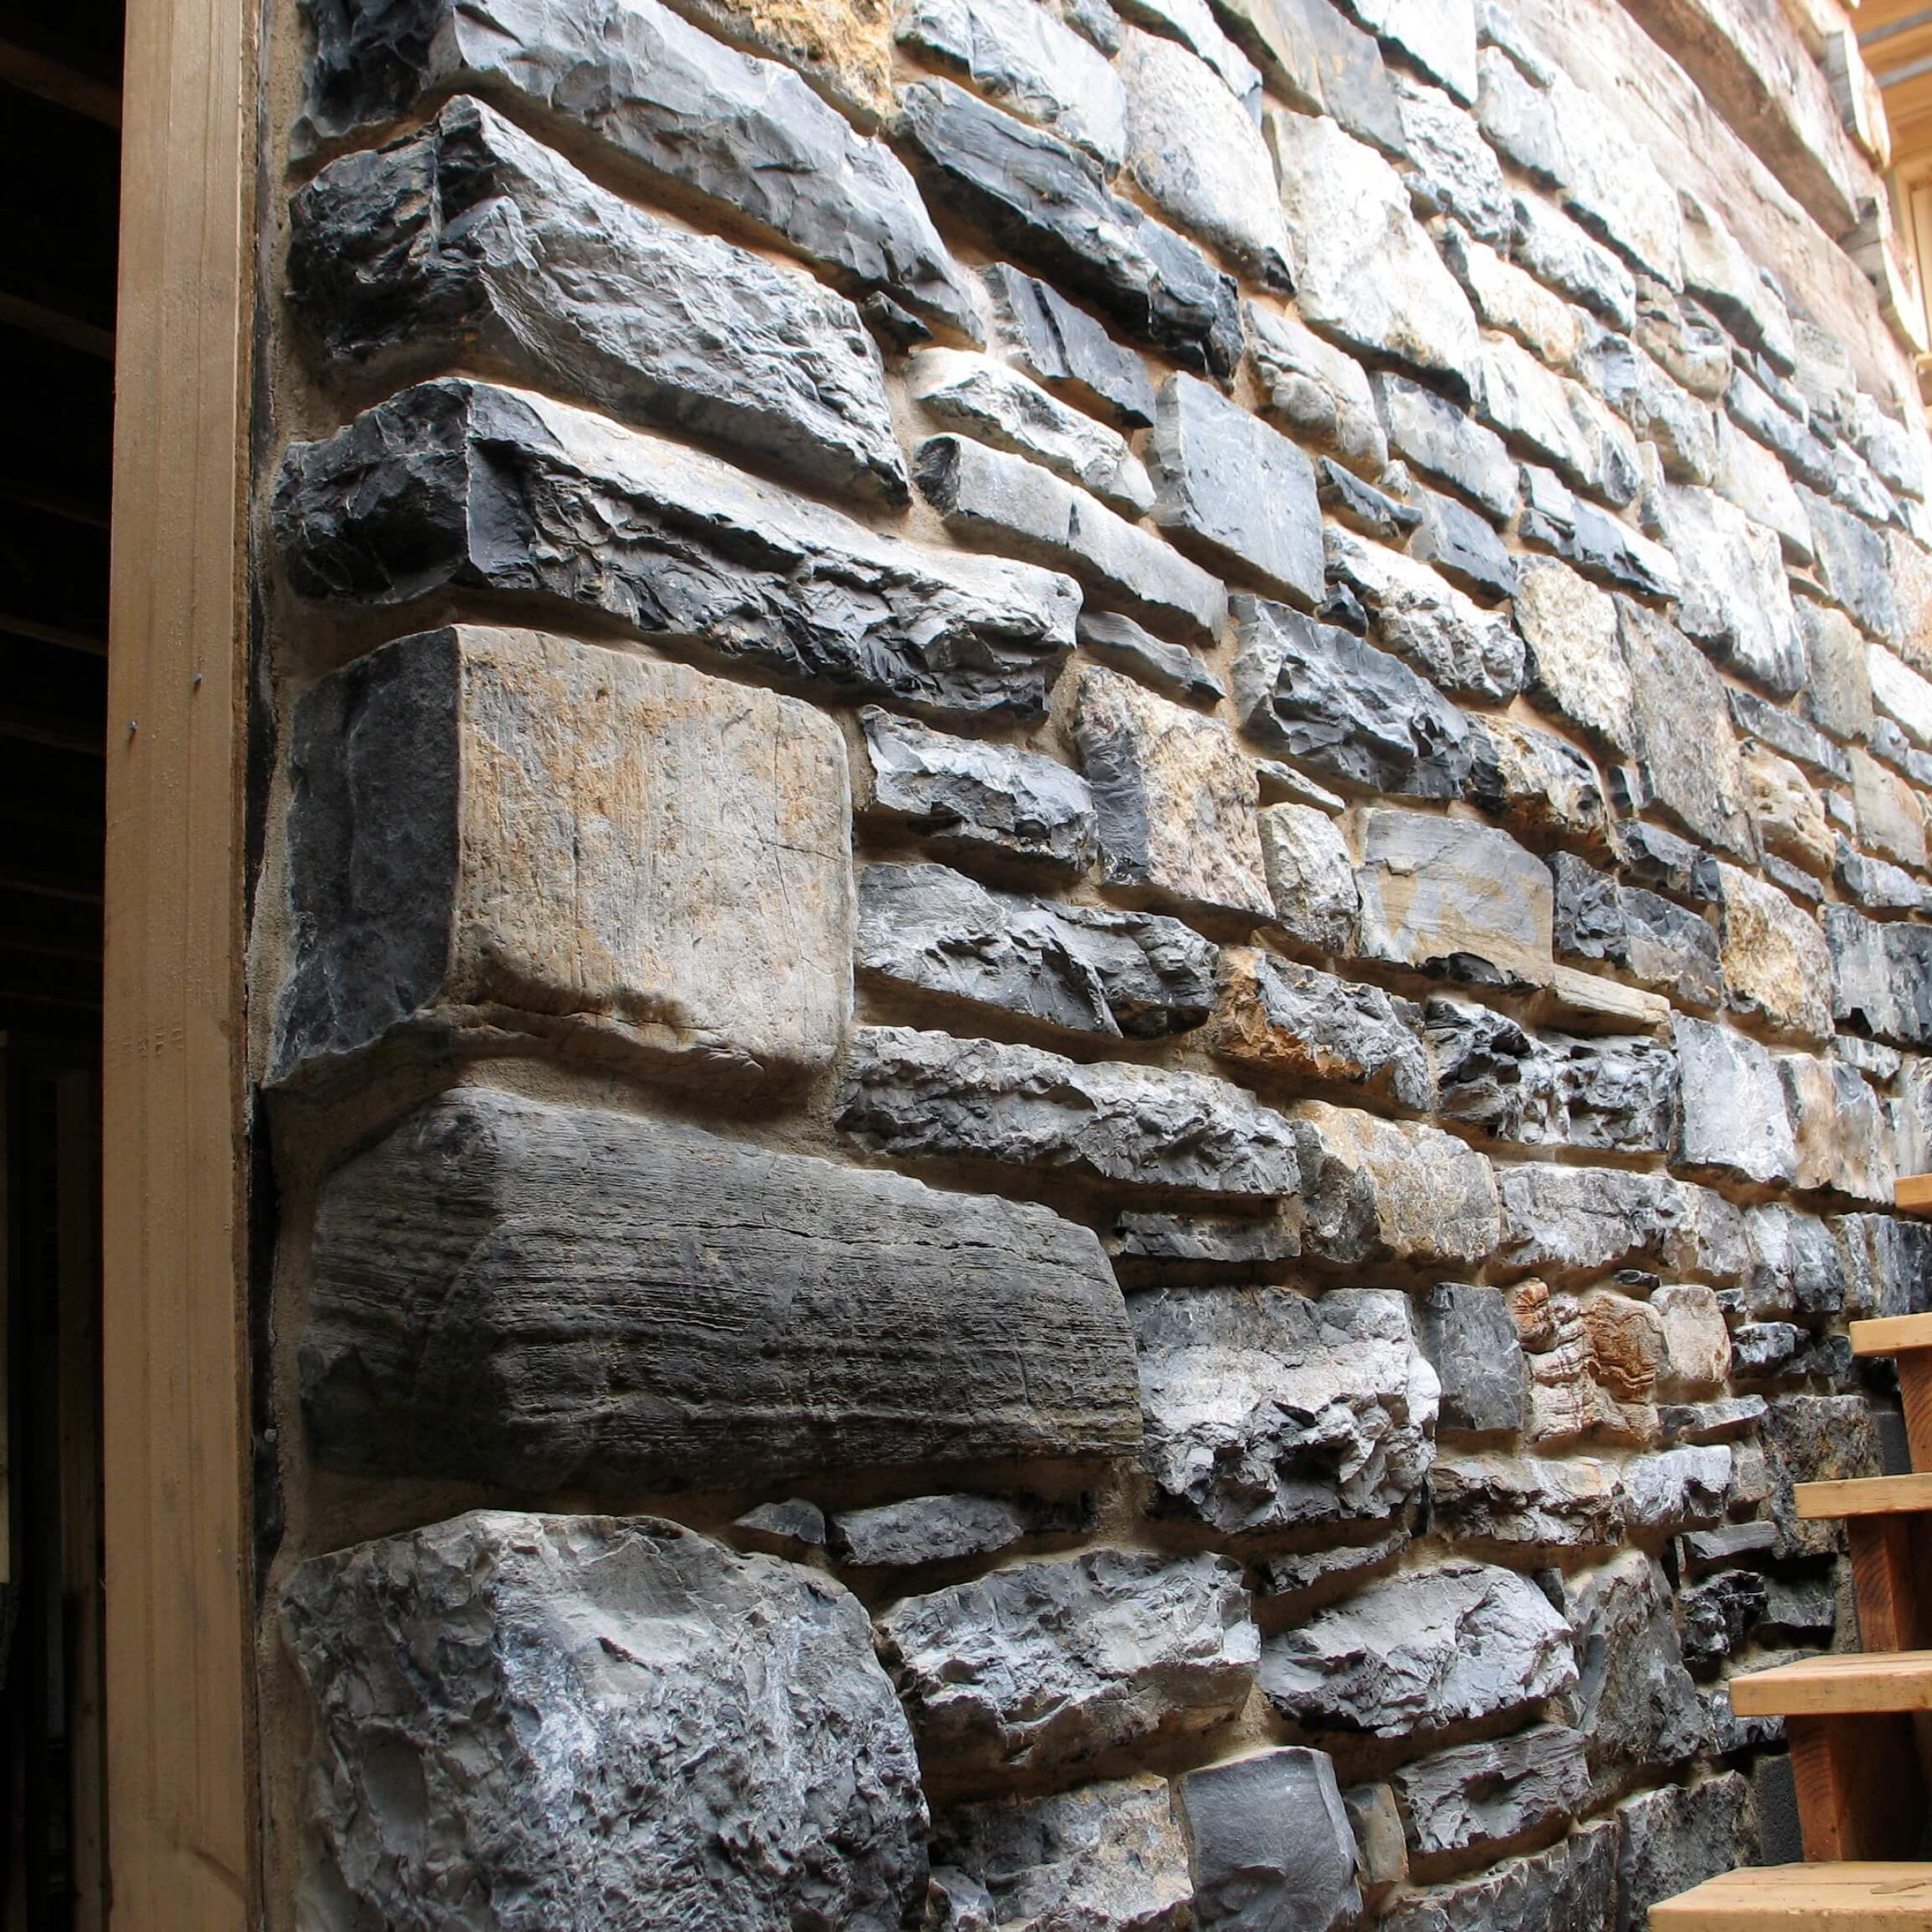 3 Stunning Displays Of Interior Stone Wall Design Intended For Recent Stones Wall Art (View 6 of 20)